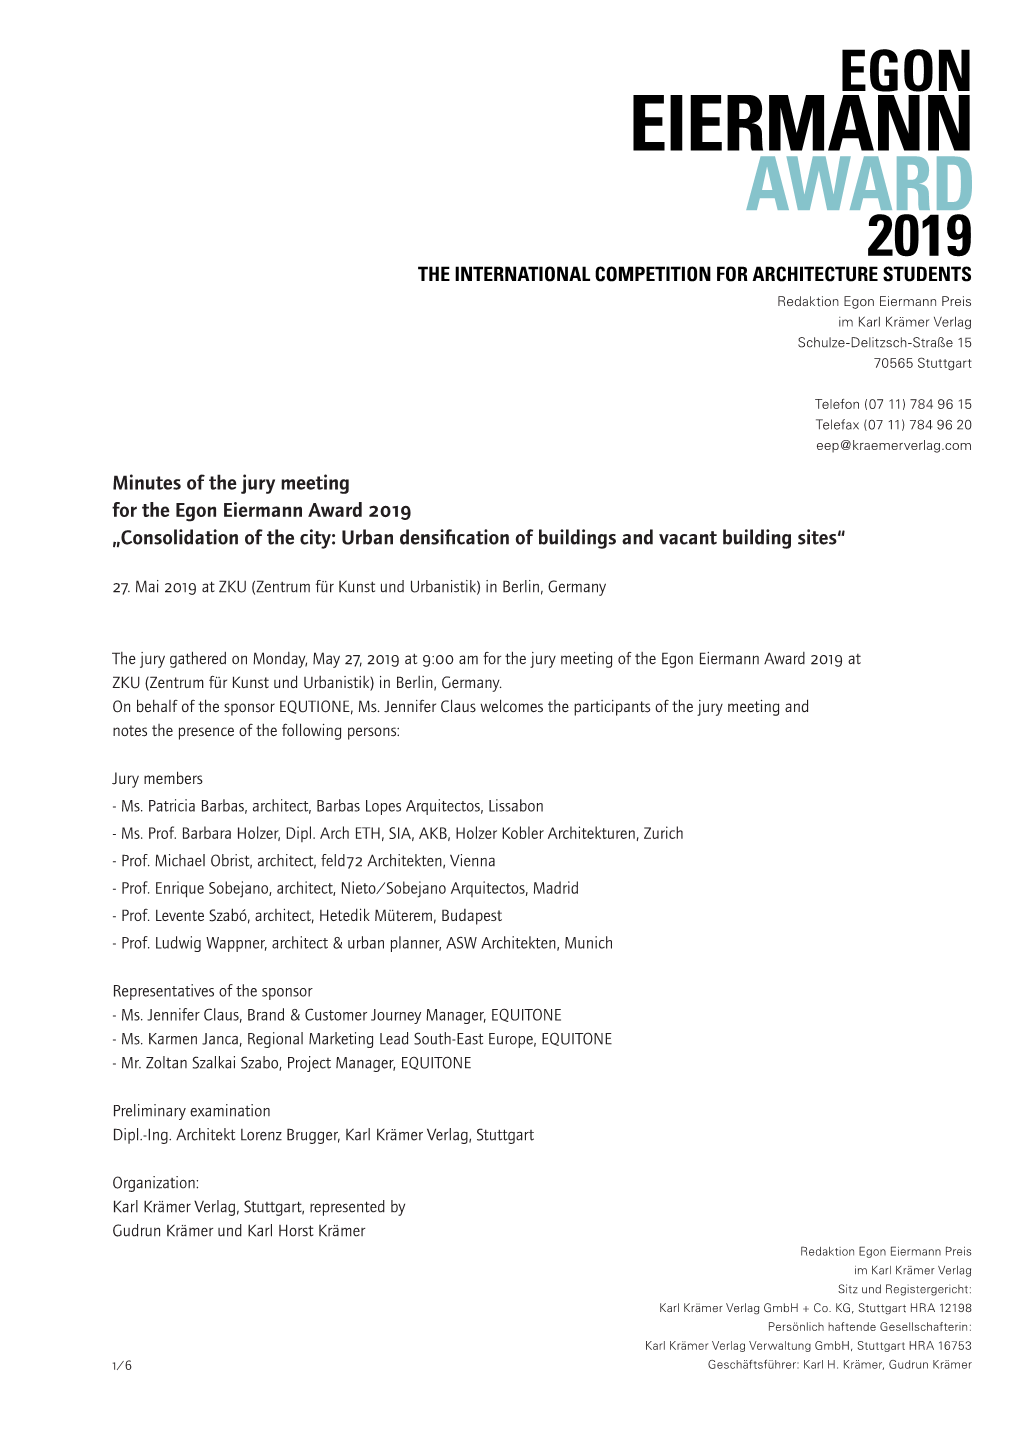 Minutes of the Jury Meeting for the Egon Eiermann Award 2019 „Consolidation of the City: Urban Densification of Buildings and Vacant Building Sites“